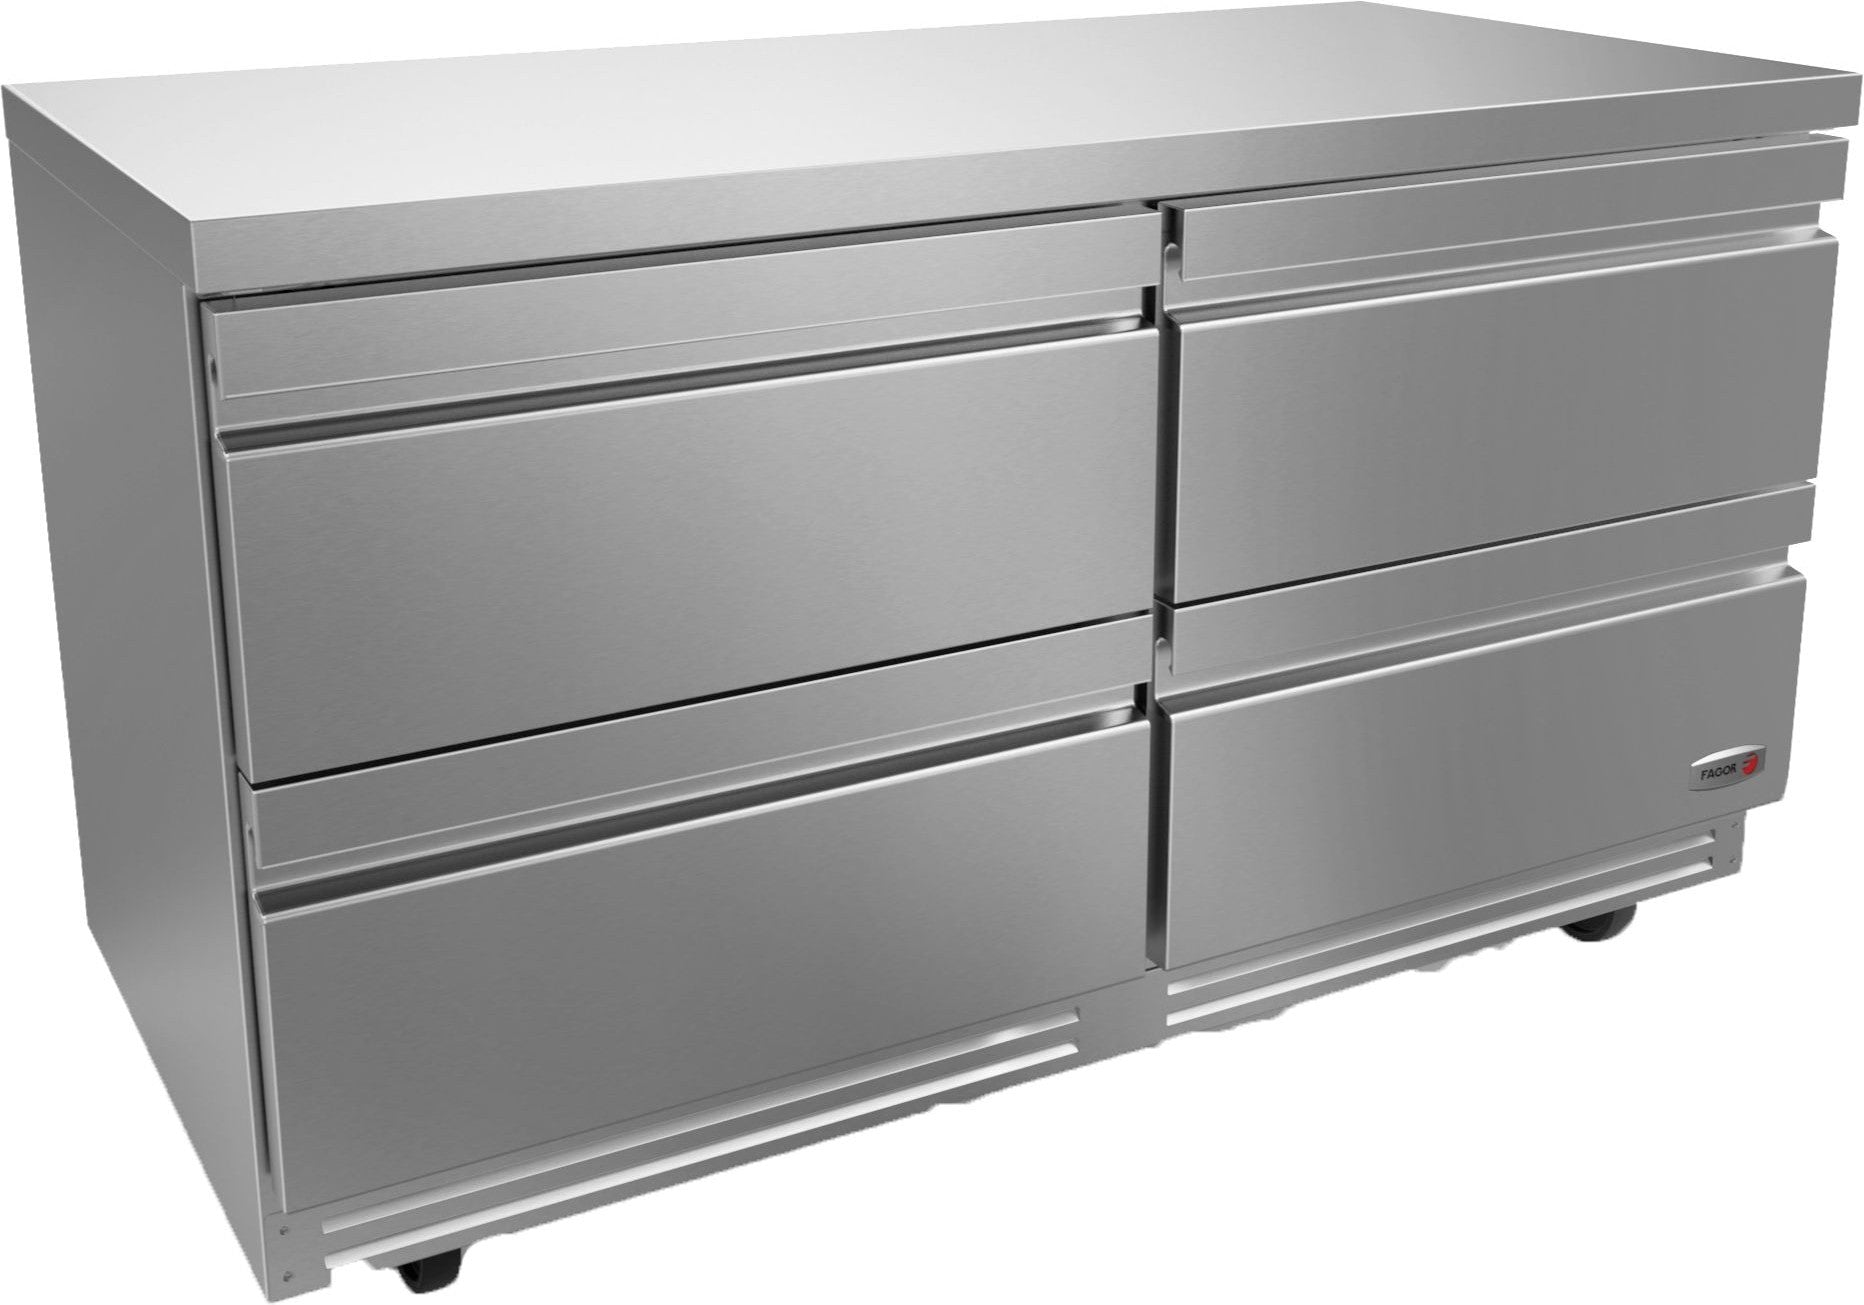 Fagor - FUR Series 115 V, 60" Undercounter Refrigerator With Four Drawer - FUR-60-D4-N